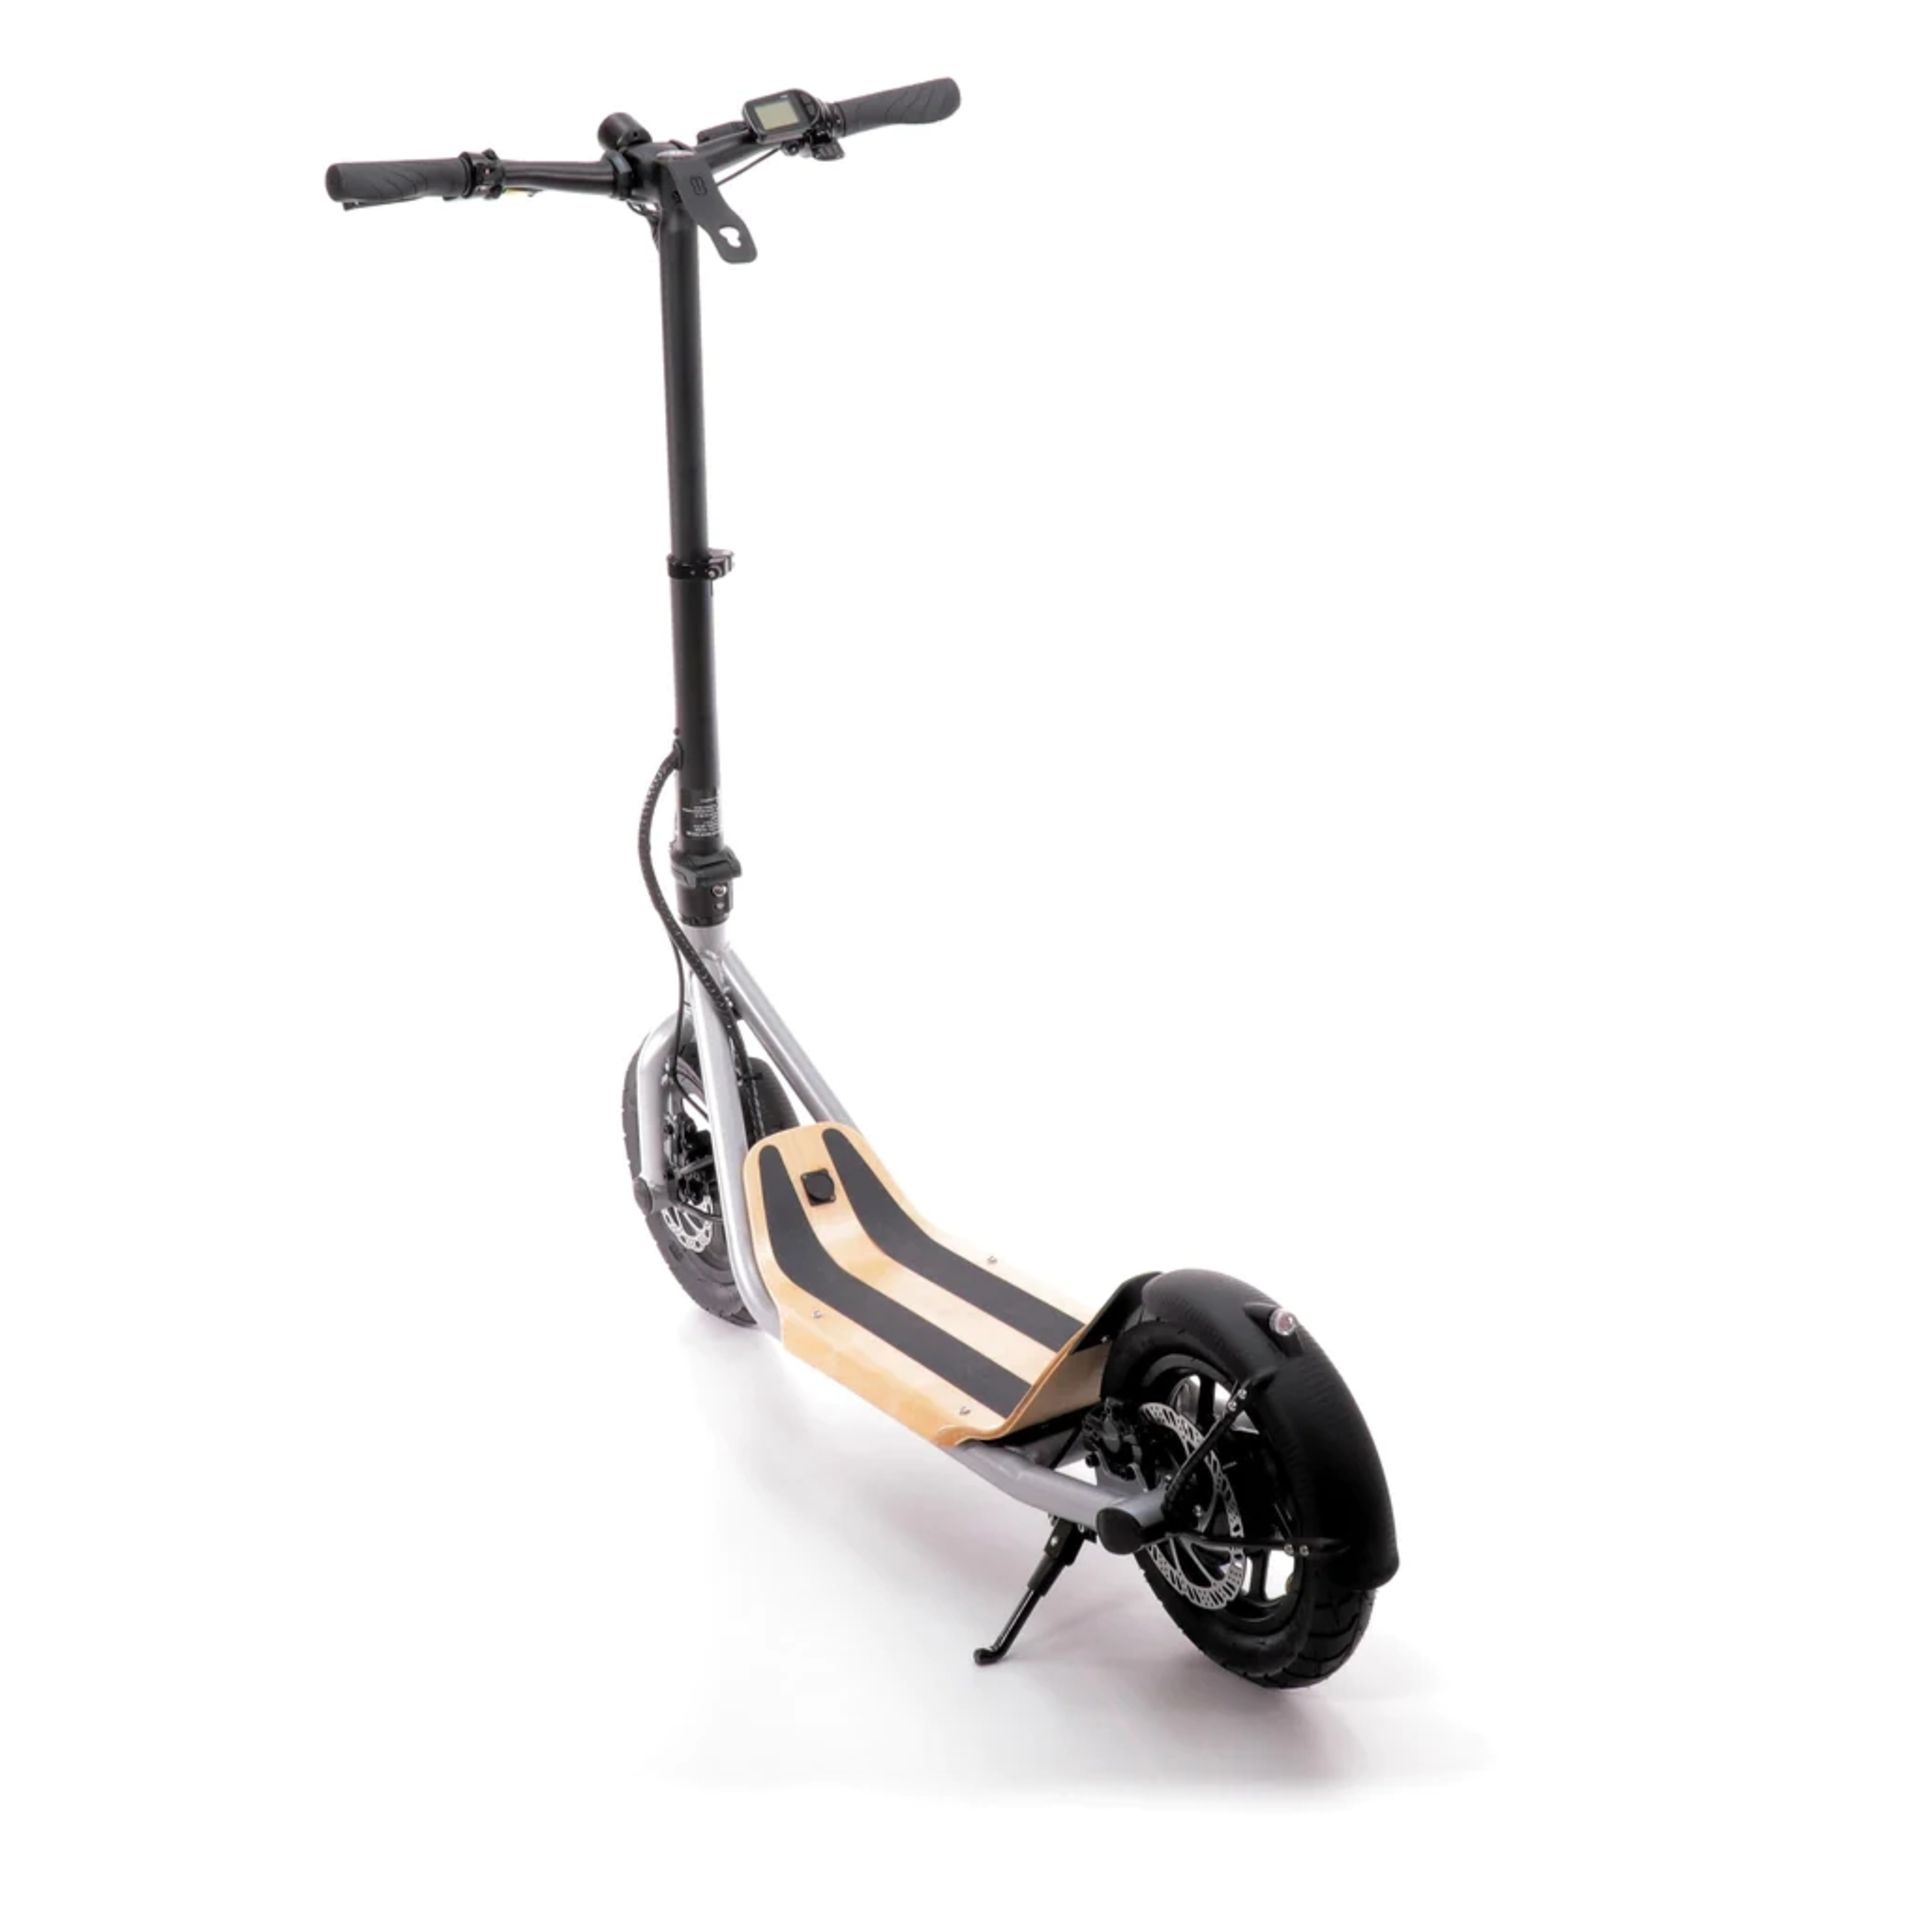 BRAND NEW 8TEV B12 PROXI CLASSIC ELECTRIC SCOOTER SILVER RRP £1299, Perfect city commuter vehicle - Image 3 of 3